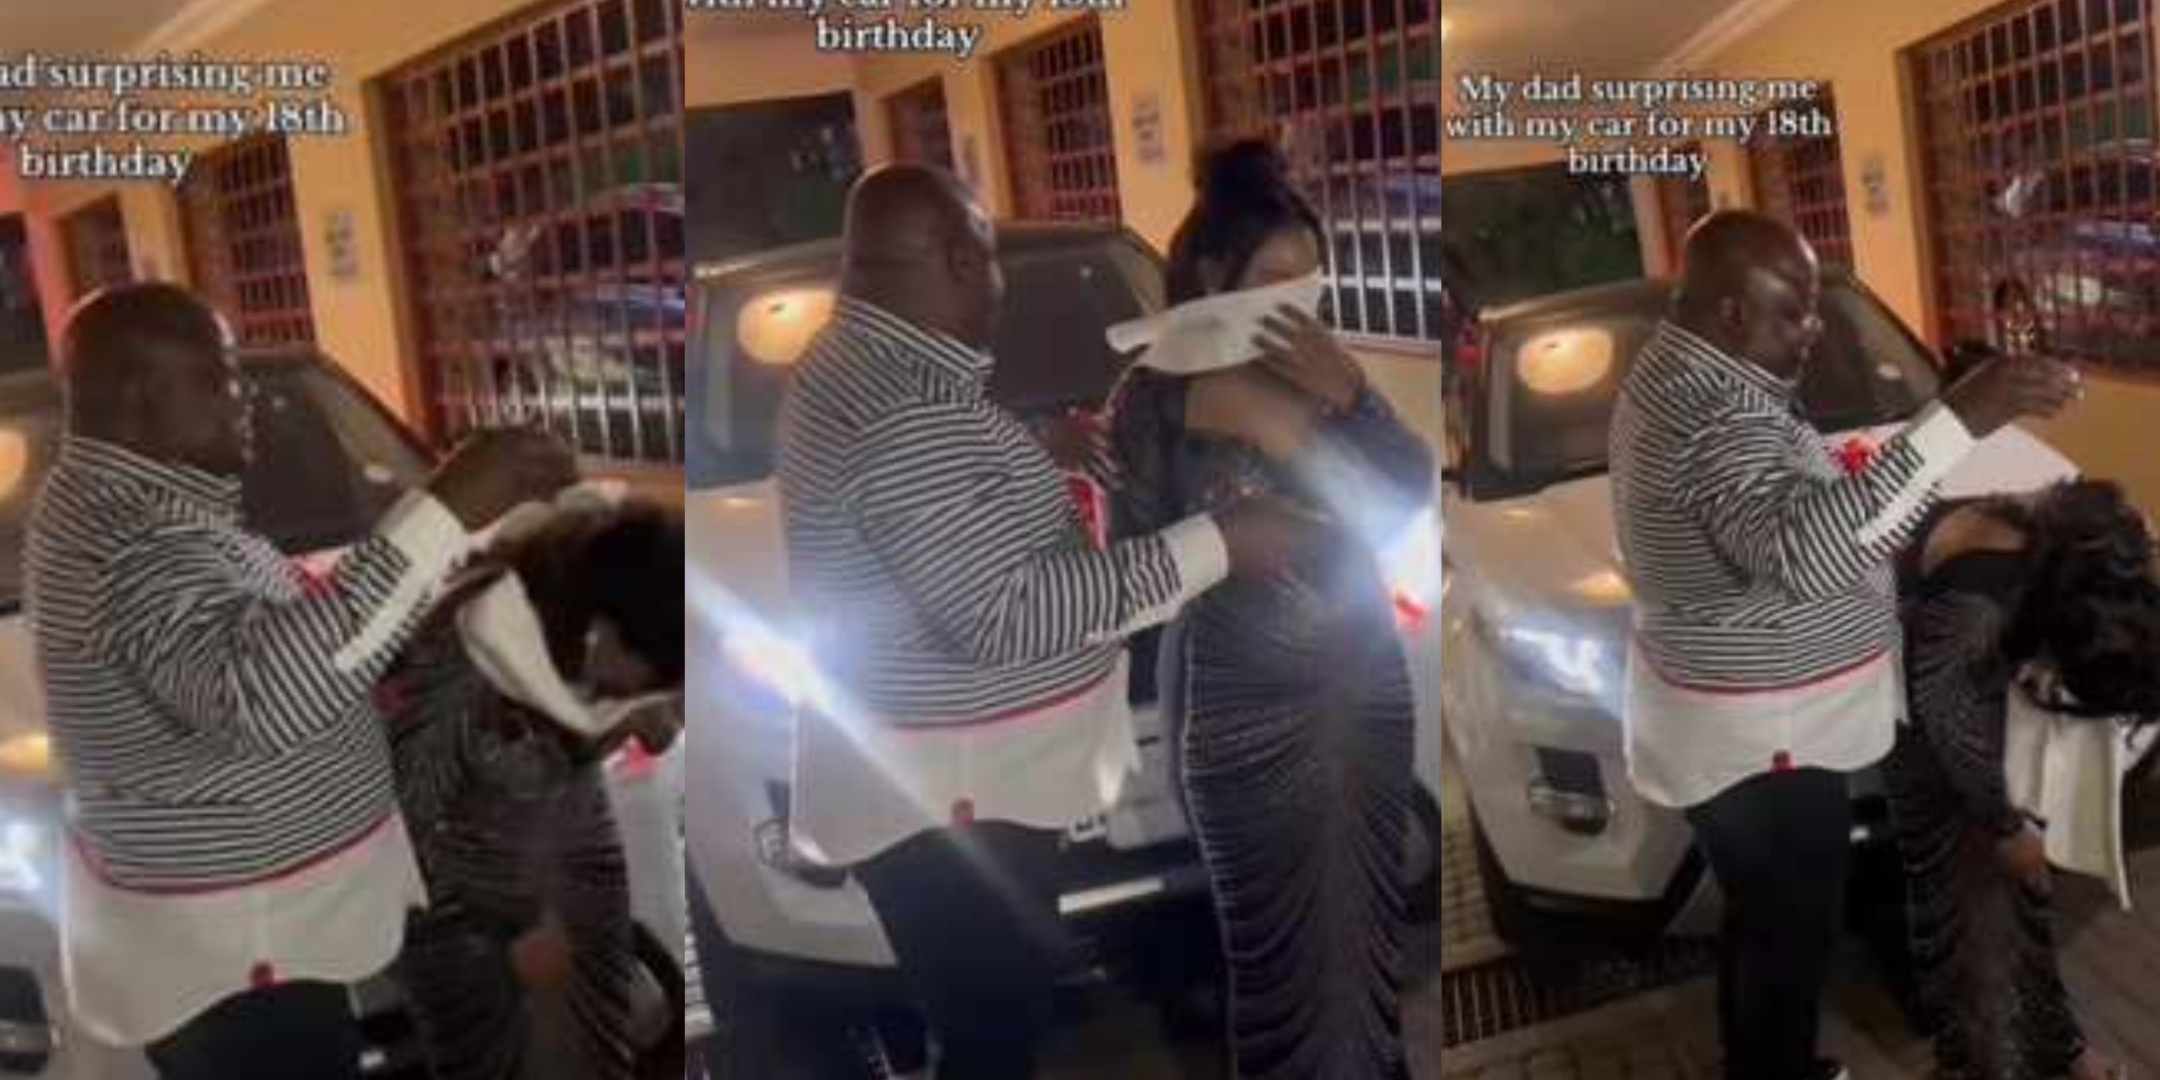 "Protect that man with your life" – Dad goes above and beyond to give daughter a car on 18th birthday